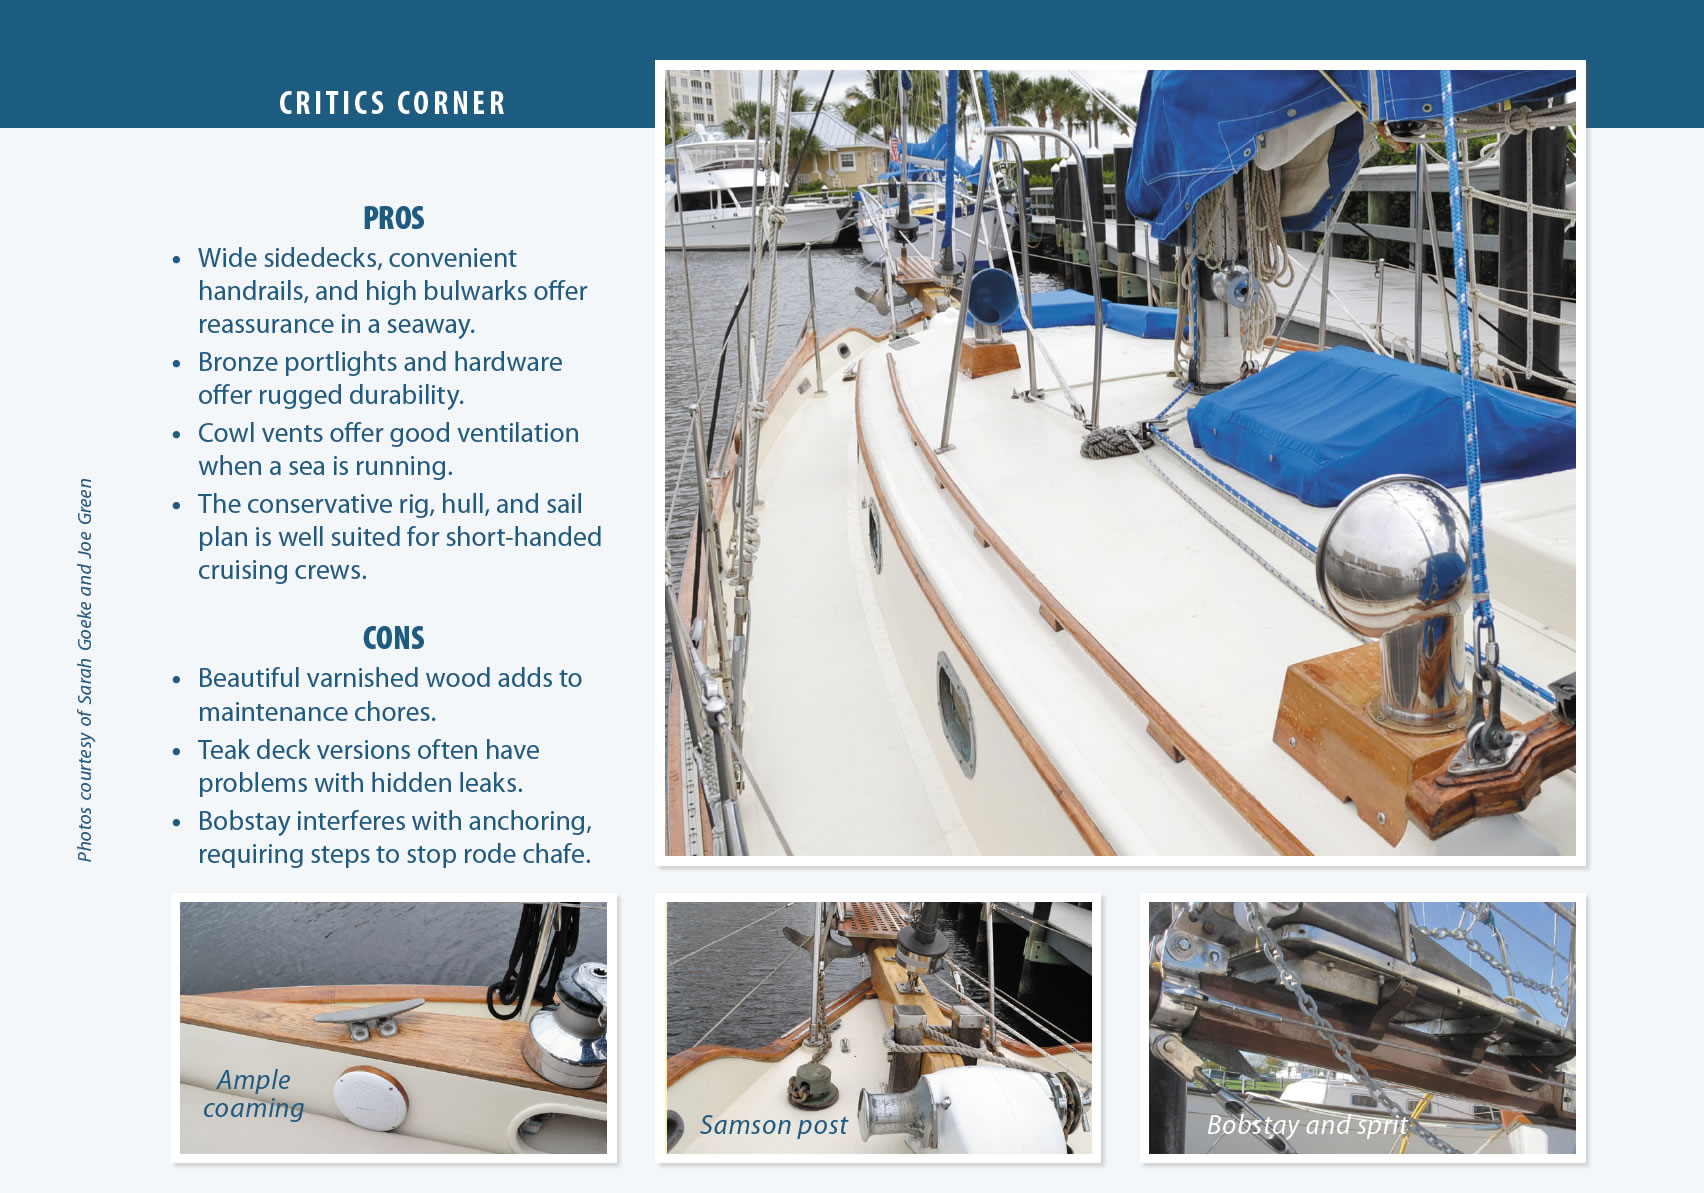 Bob Perrys Salty Tayana 37-Footer Boat Review